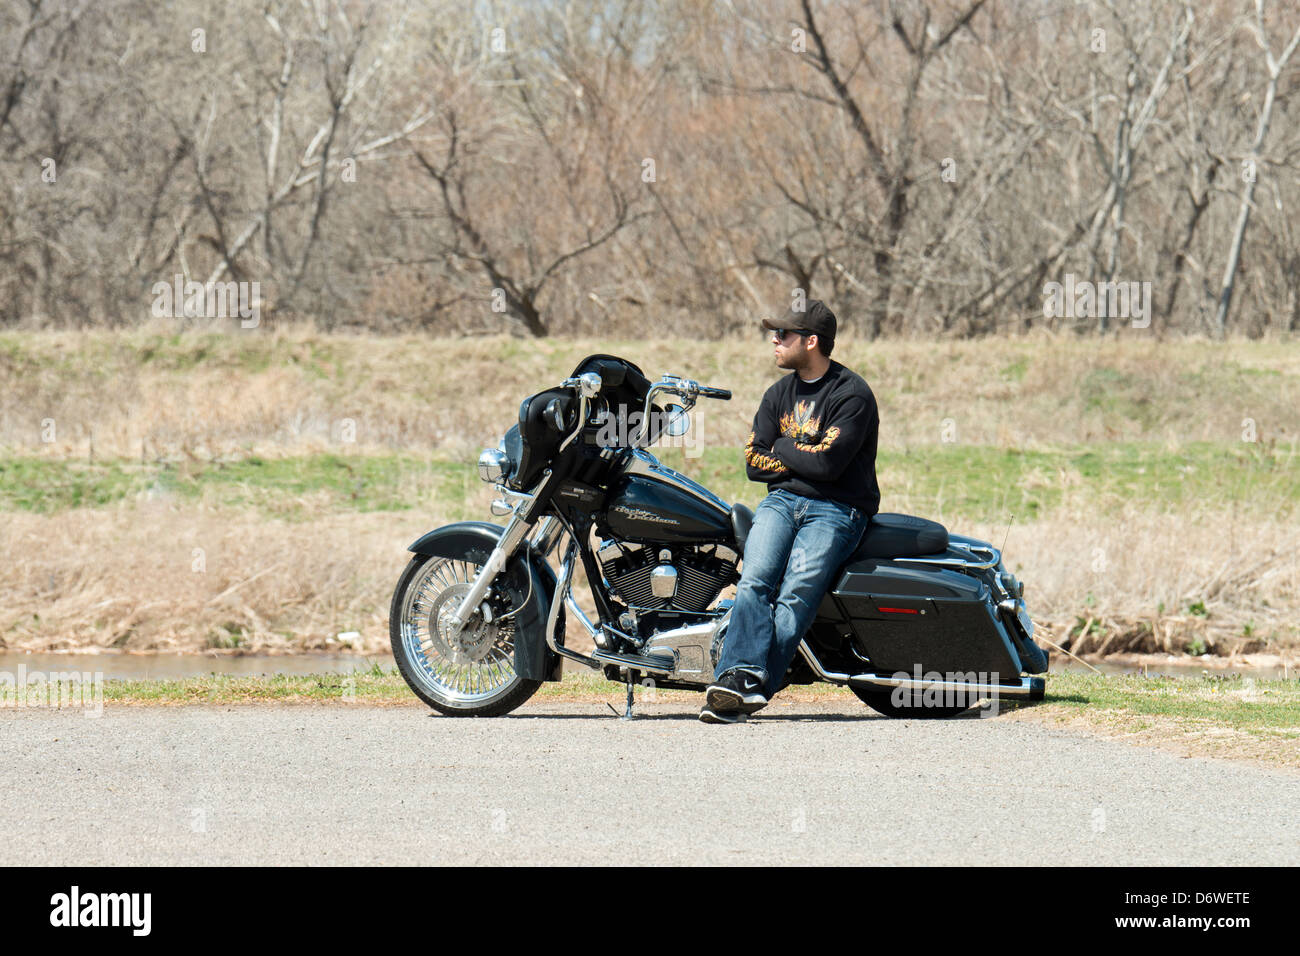 A man in his late 20s or early 30s, sits sideways on his Harley Davidson motorcycle and enjoys the early spring day. Oklahoma, USA. Stock Photo